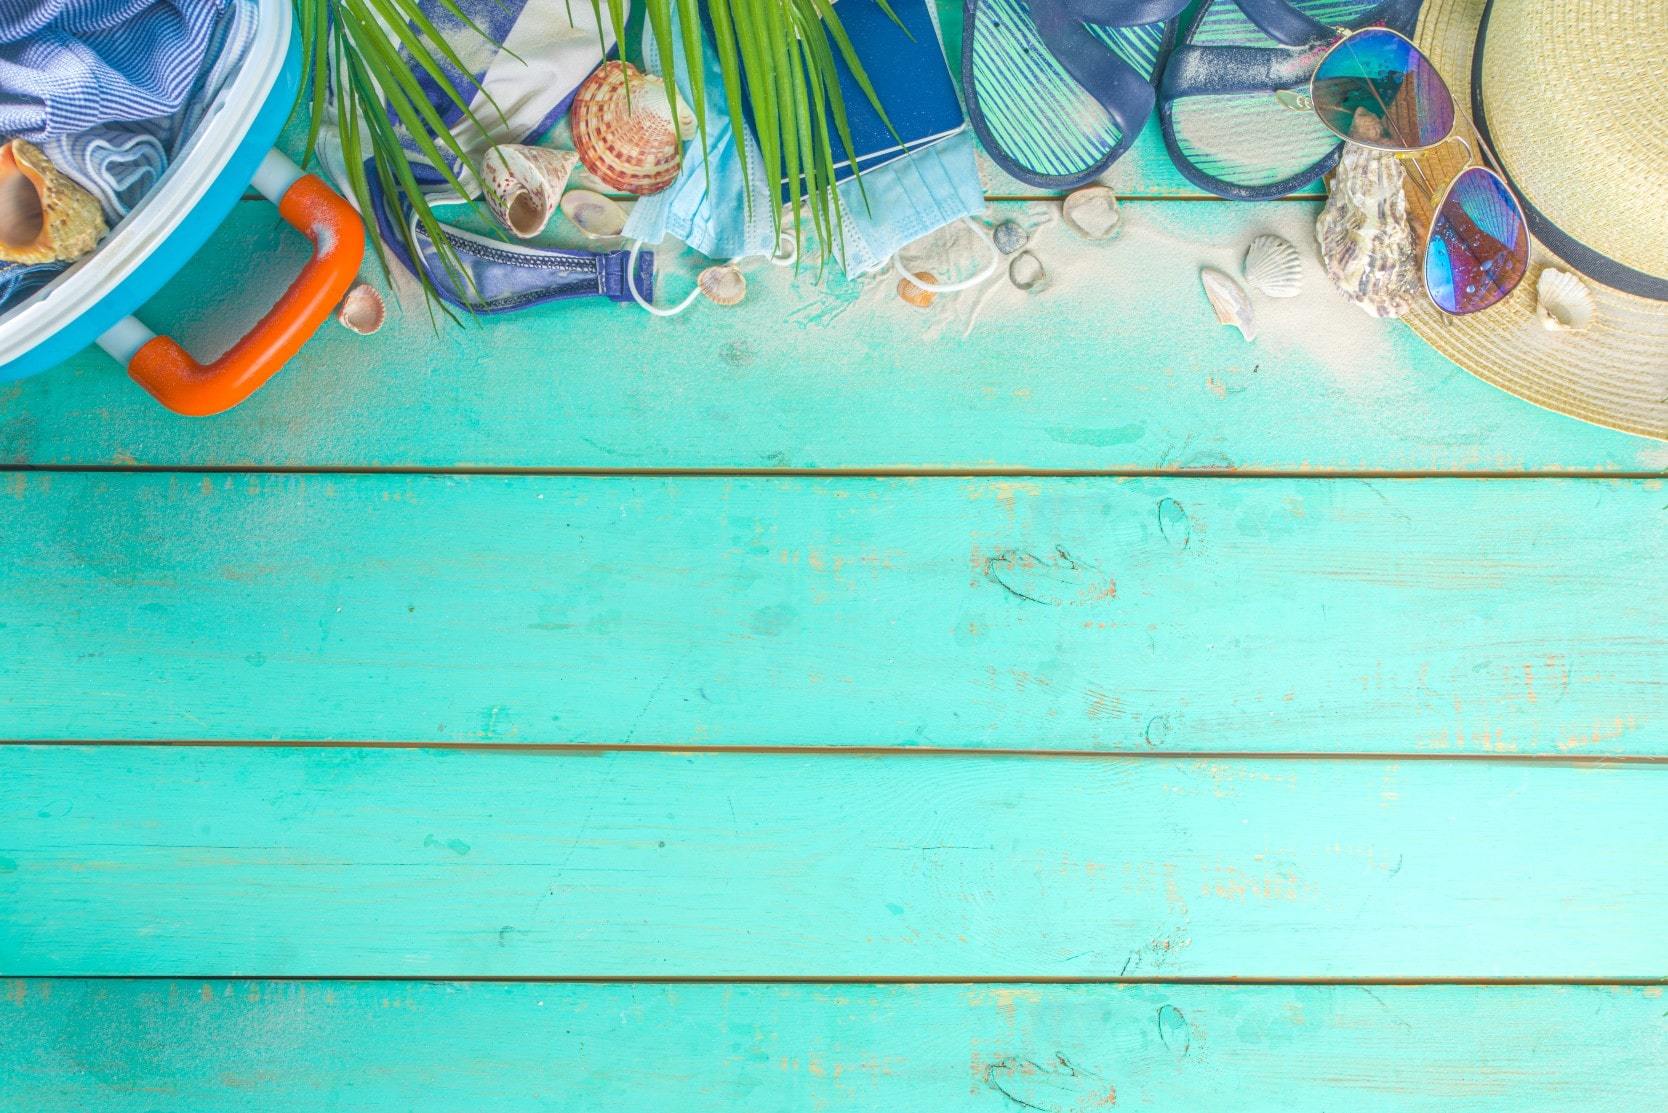 Summer holiday items against wooden boards painted teal